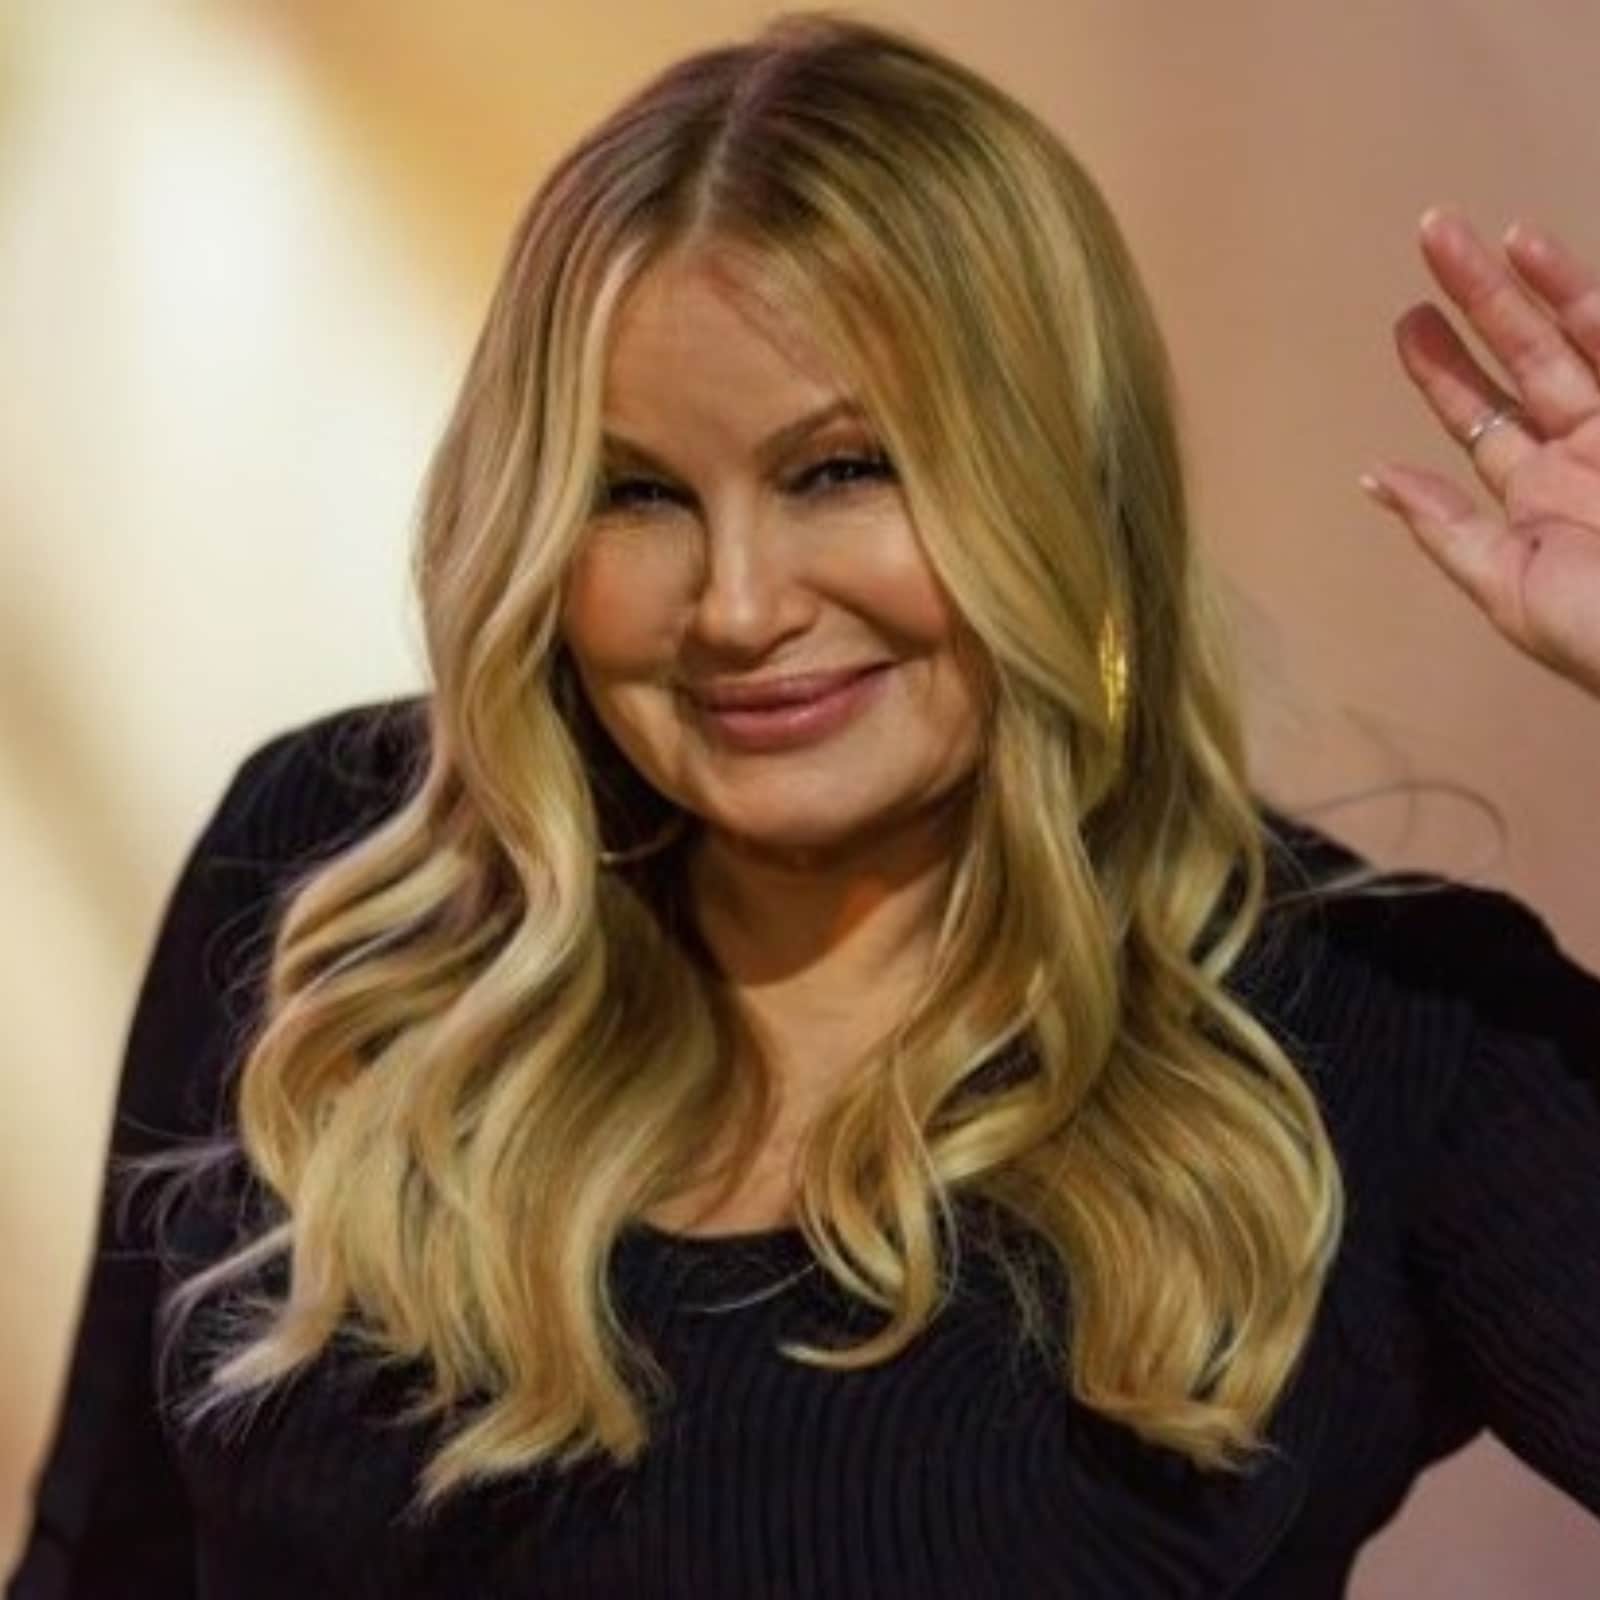 Sleeping Punjabi Sexy Vide - Jennifer Coolidge Admits To Sleeping With 200 People After American Pie:  'Got Lots Of Sexual Action'